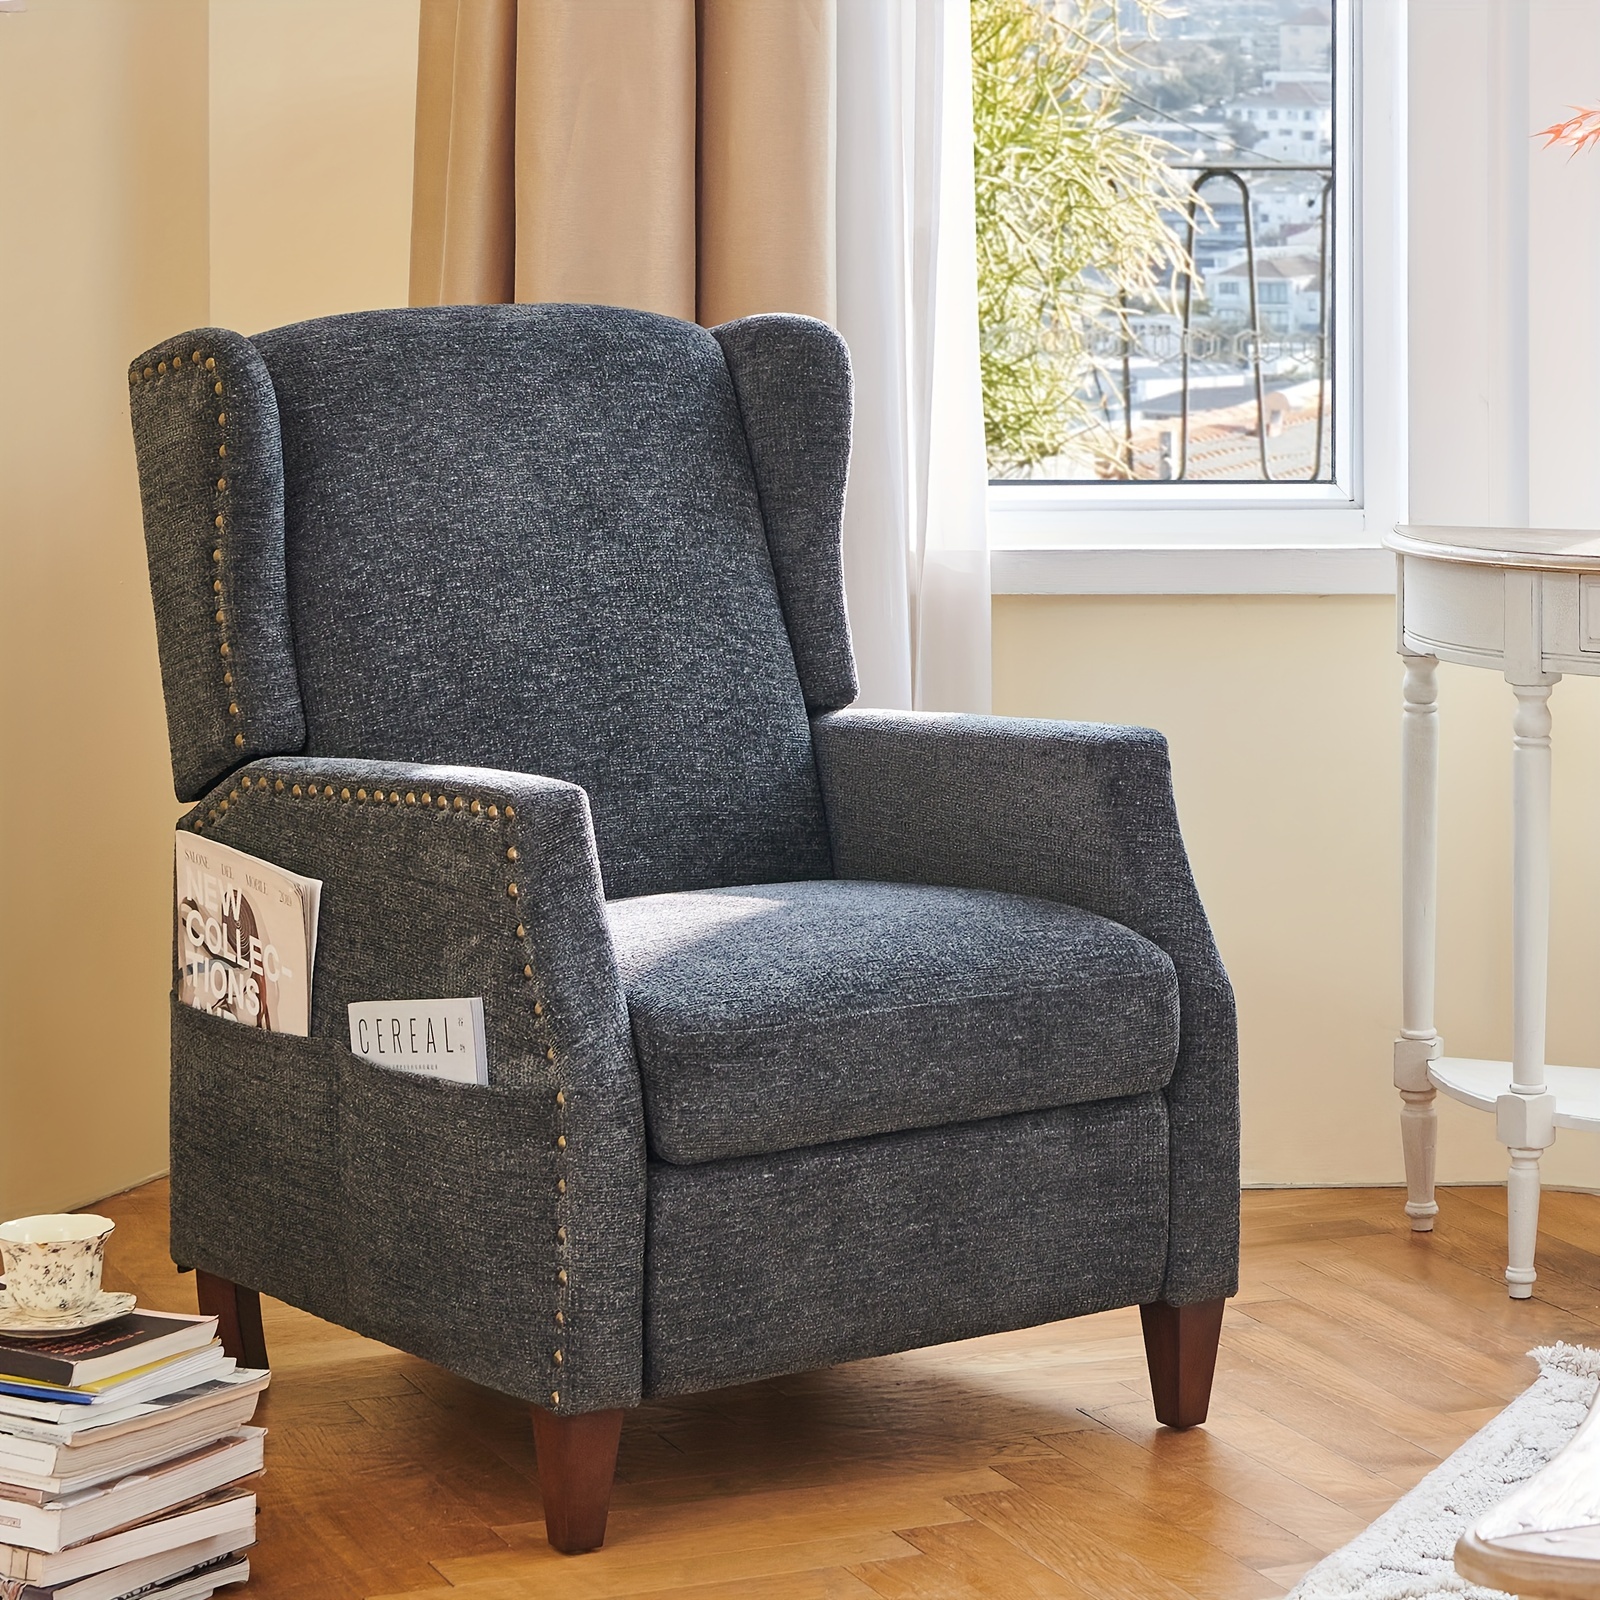 

Colamy Wingback Pushback Recliner Chair With Storage Pocket, Upholstered Fabric Living Room Chair Armchair, Dark Grey